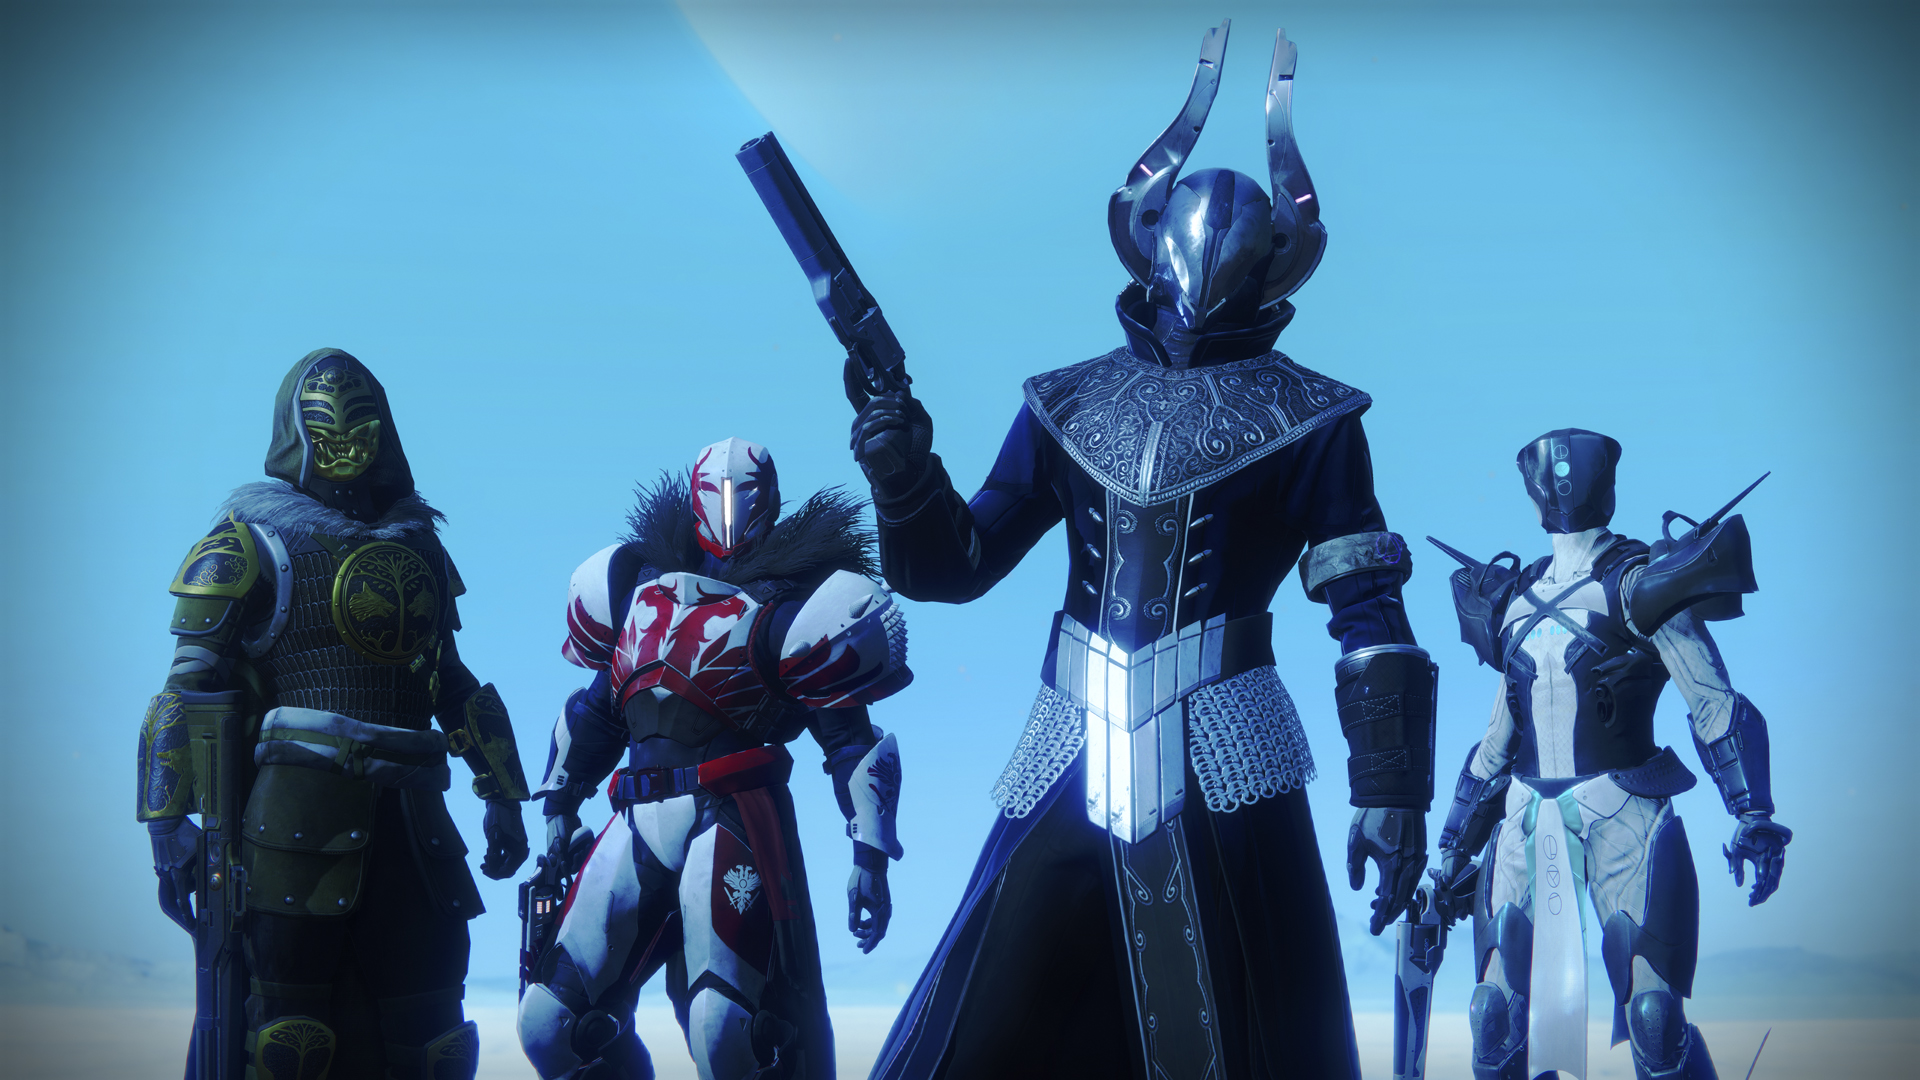 Why Destiny 2 players got so angry and how Bungie plans to make them happy again